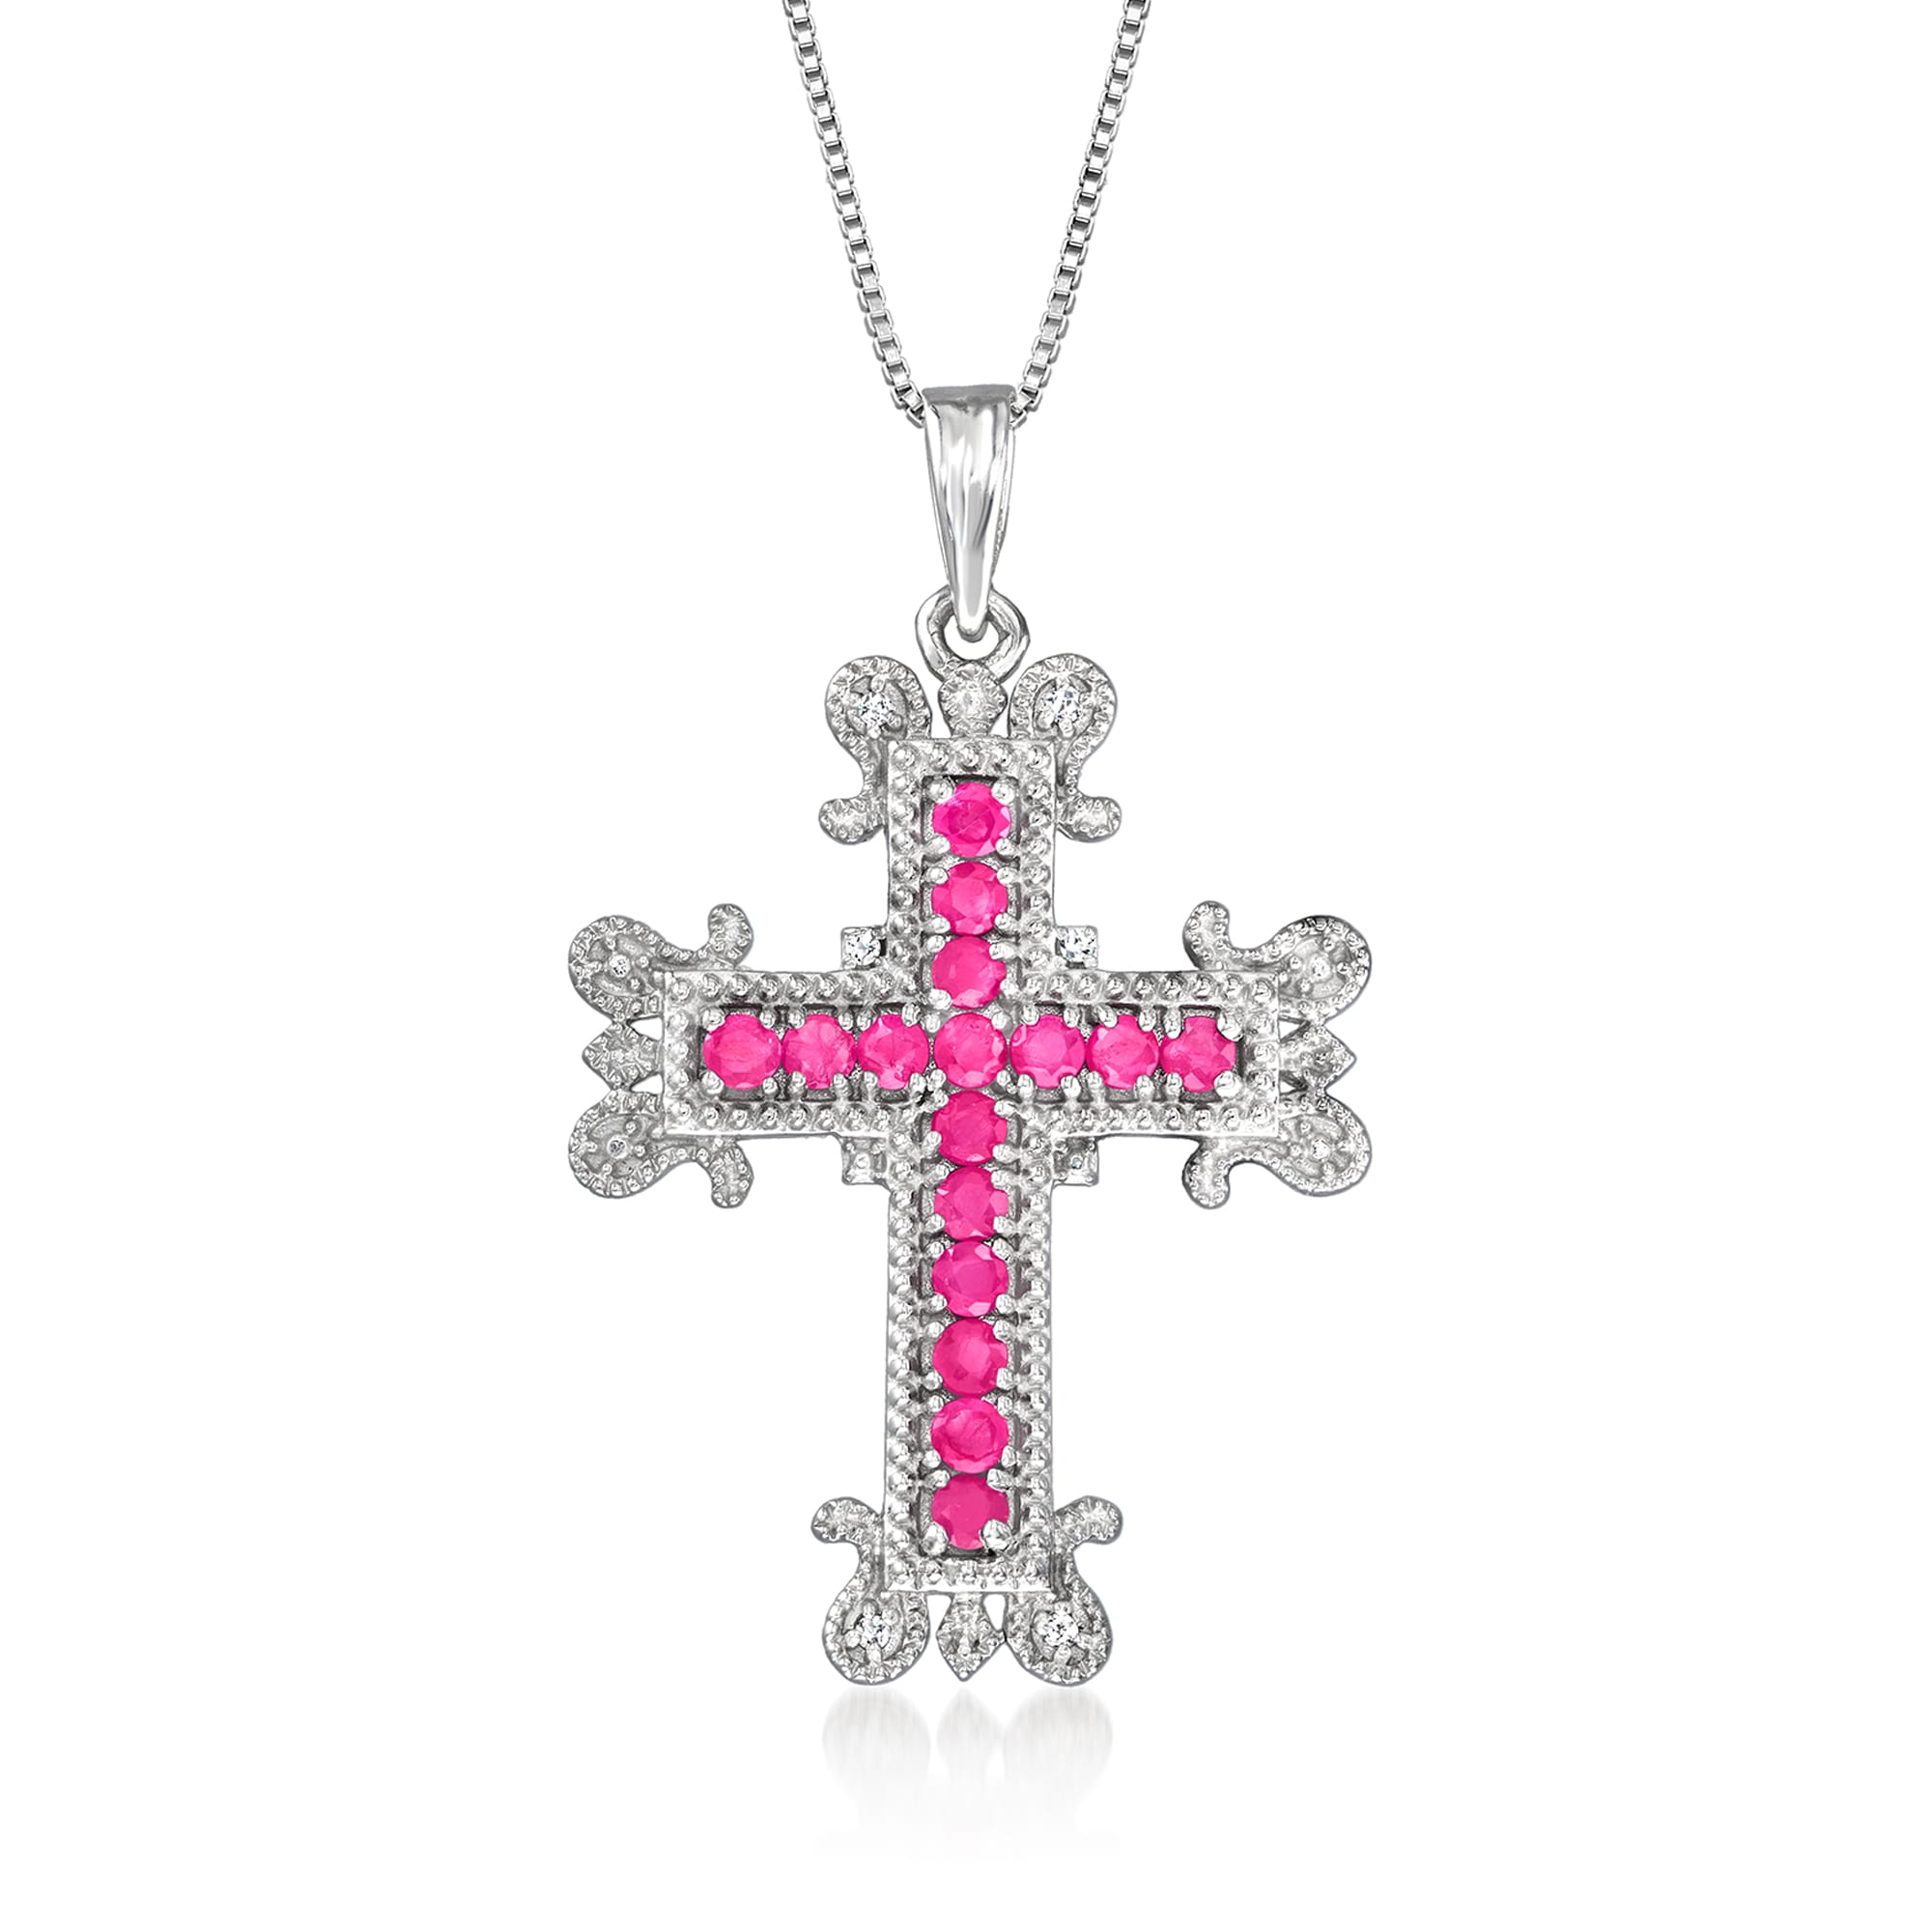 3.80 ct. t.w. Aquamarine and 3.50 ct. t.w. Sapphire Cross Pendant Necklace  in Sterling Silver | Ross-Simons